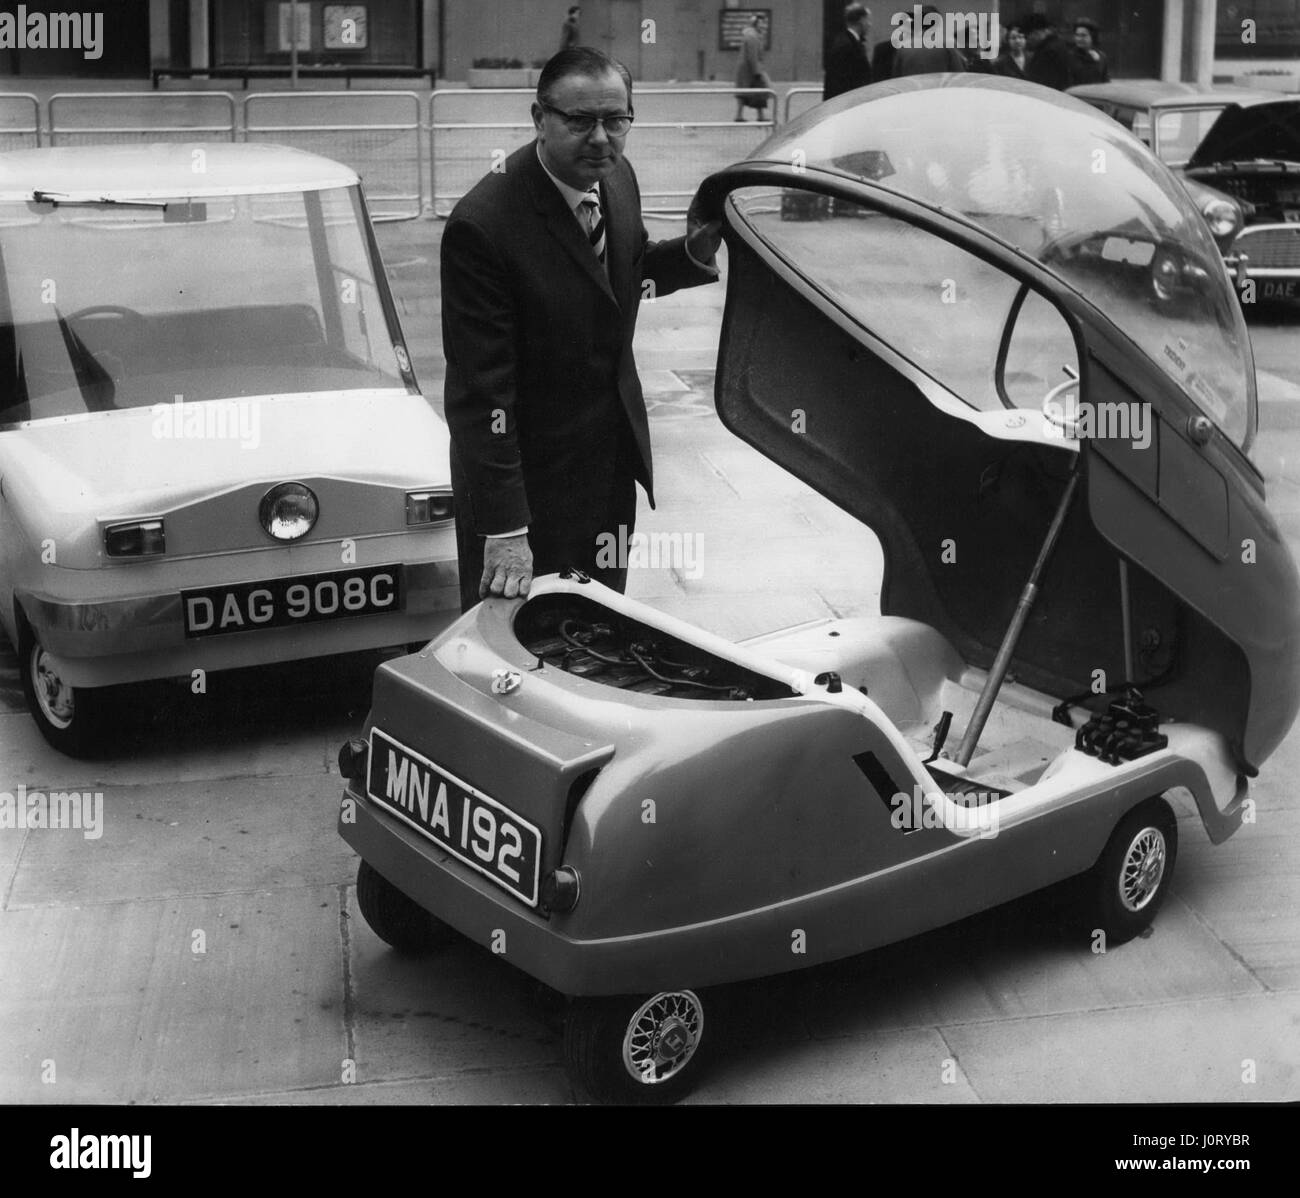 Mar. 03, 1966 - Battery Electric Vehicles demonstrated: Two battery electric Mini's converted from conventional 10 engine driver and an experimental purpose built short range electric car called the '''Scamp'' were demonstrated in the heart of the City of London today. Instead of filling up with fuel the cars plug in to cheap off peak electricity giving running cost of about d per mile. The cars were shown by the Electricity Council as a stage in the evolution of an all purpose, short range commuting and town centre car. The mini conversions are part of the Electricity Council's Appliance and Stock Photo